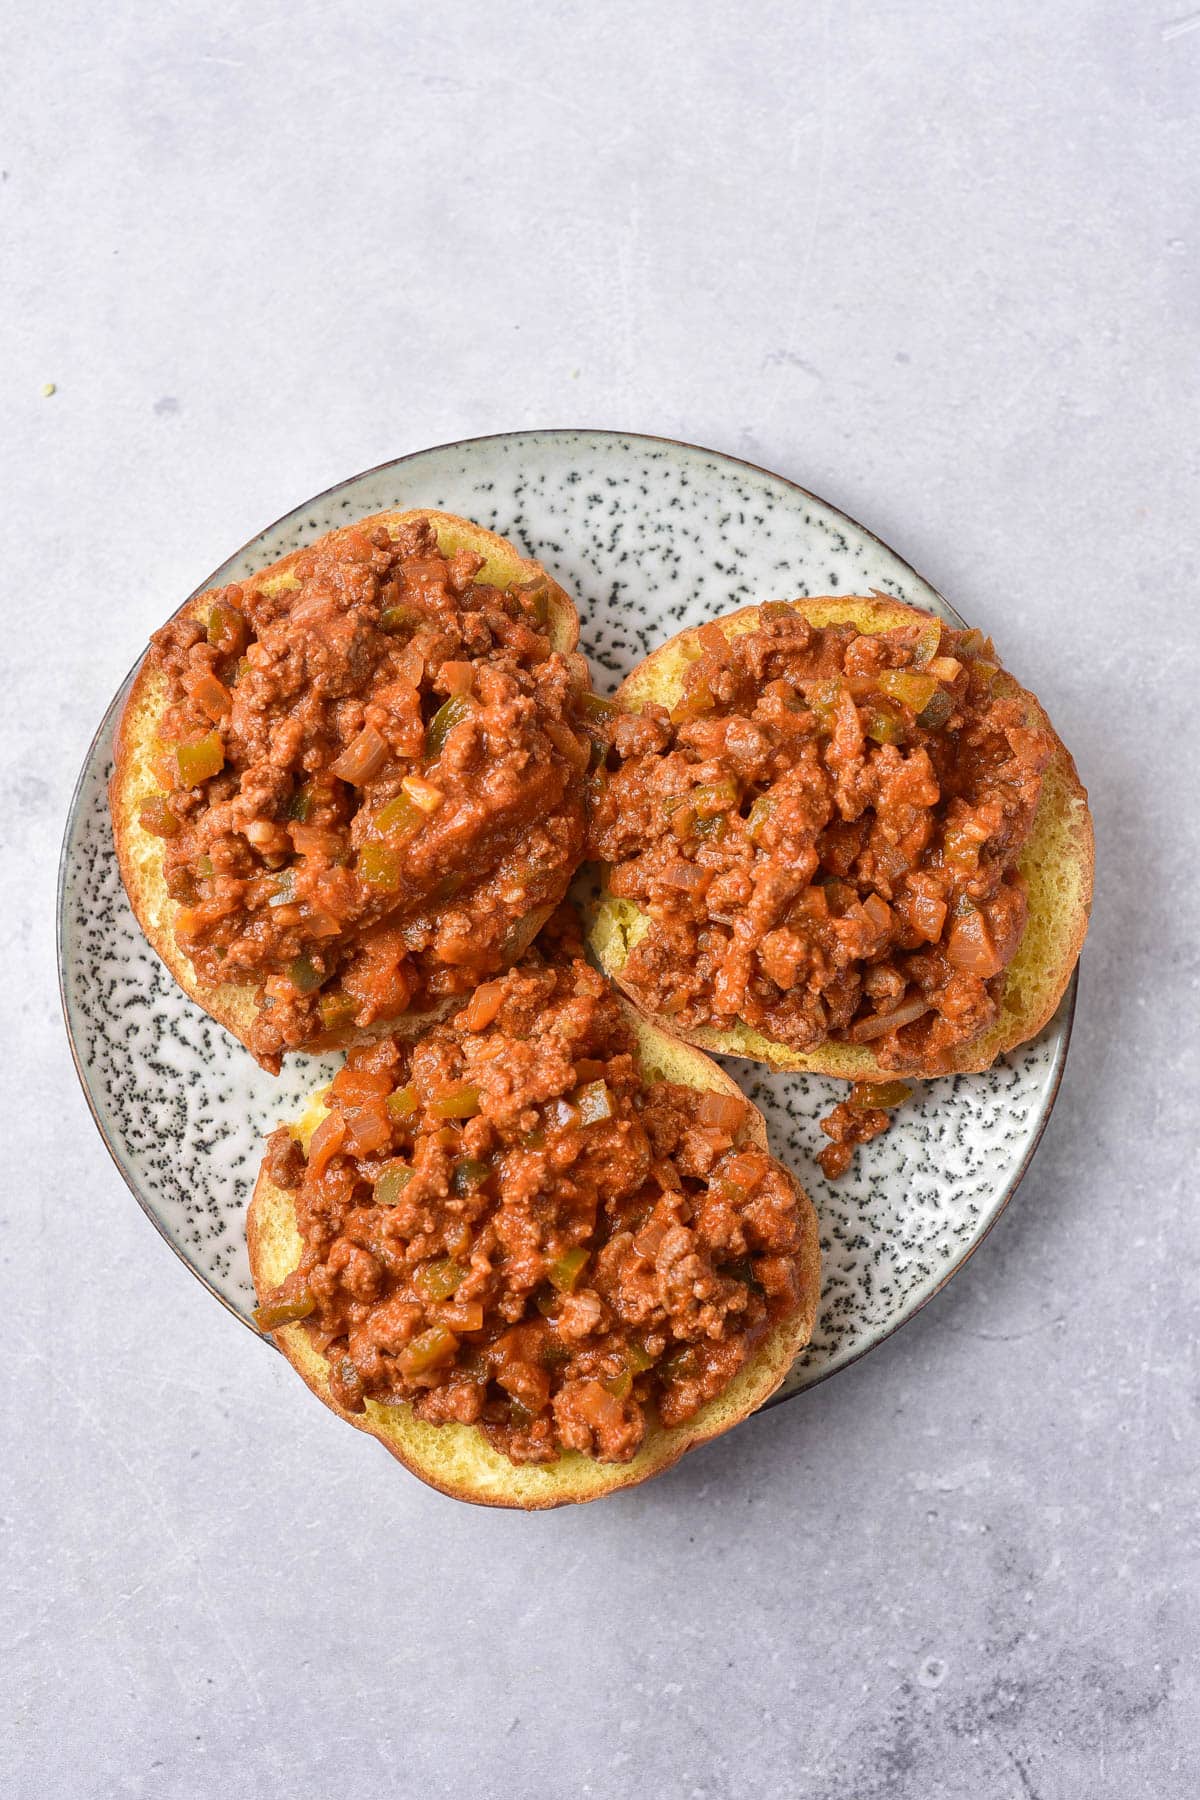 Ground beef with tomato based sauce on the bottoms of hamburger buns.